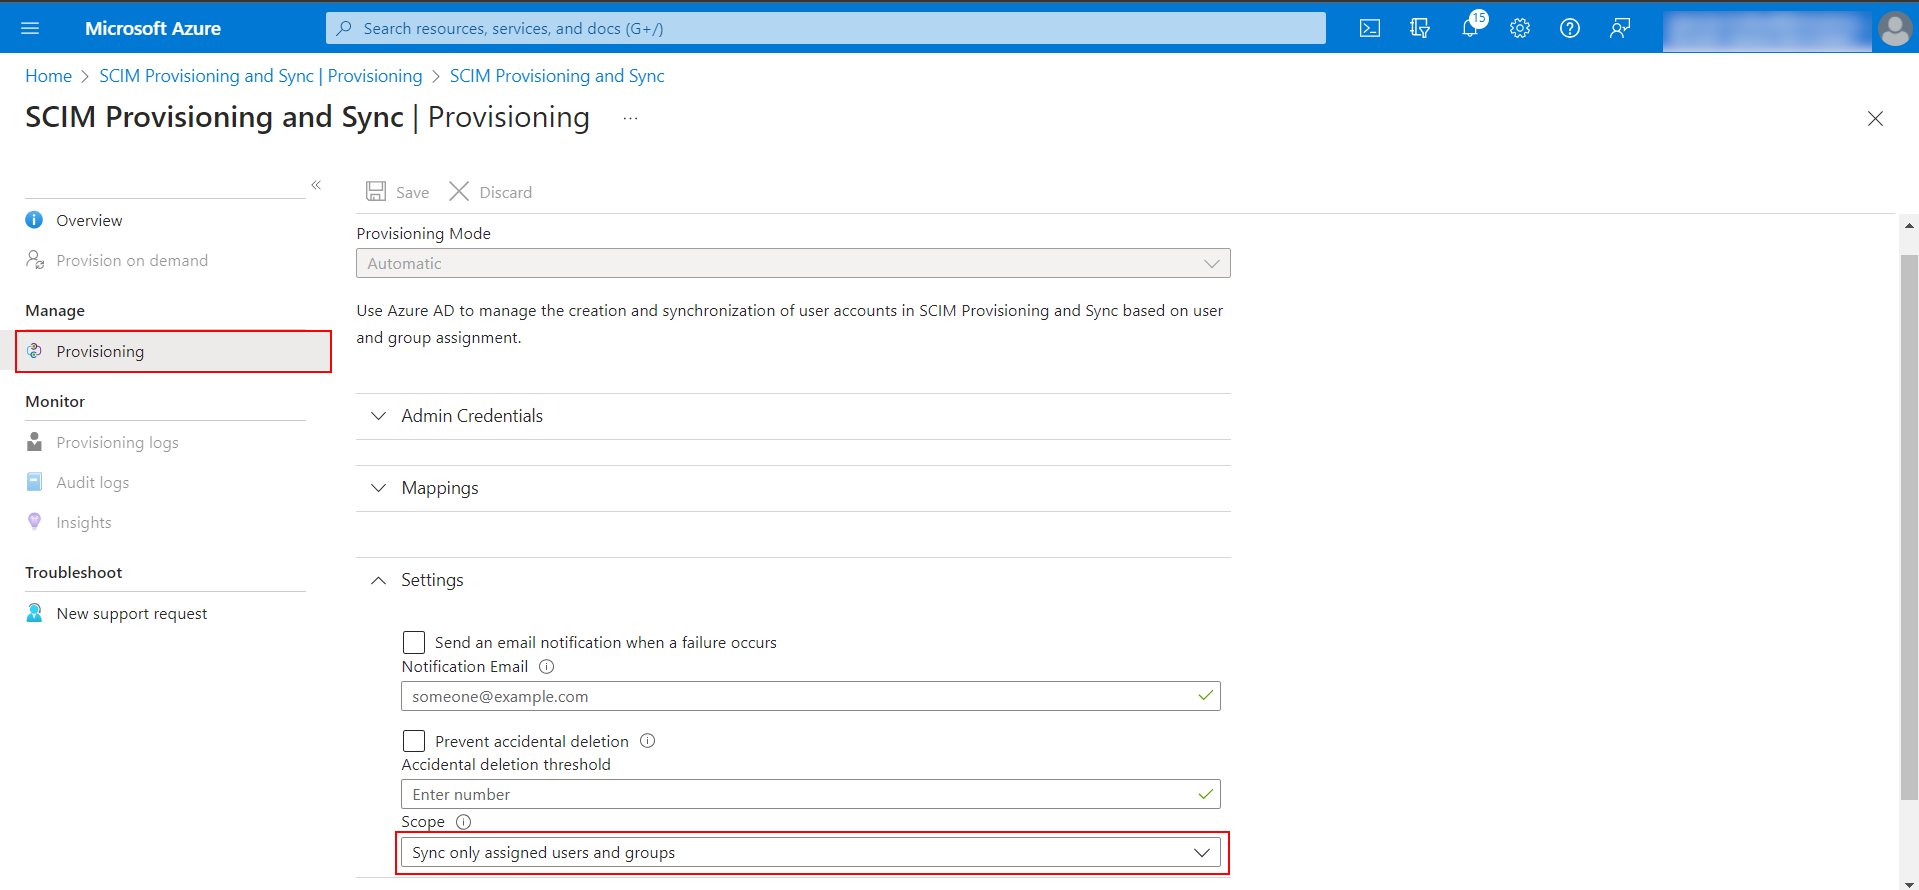 DotNetNuke (DNN) SCIM User Provisioning with Azure AD | DNN SCIM -  Sync only assigned users and groups from the Scope dropdown